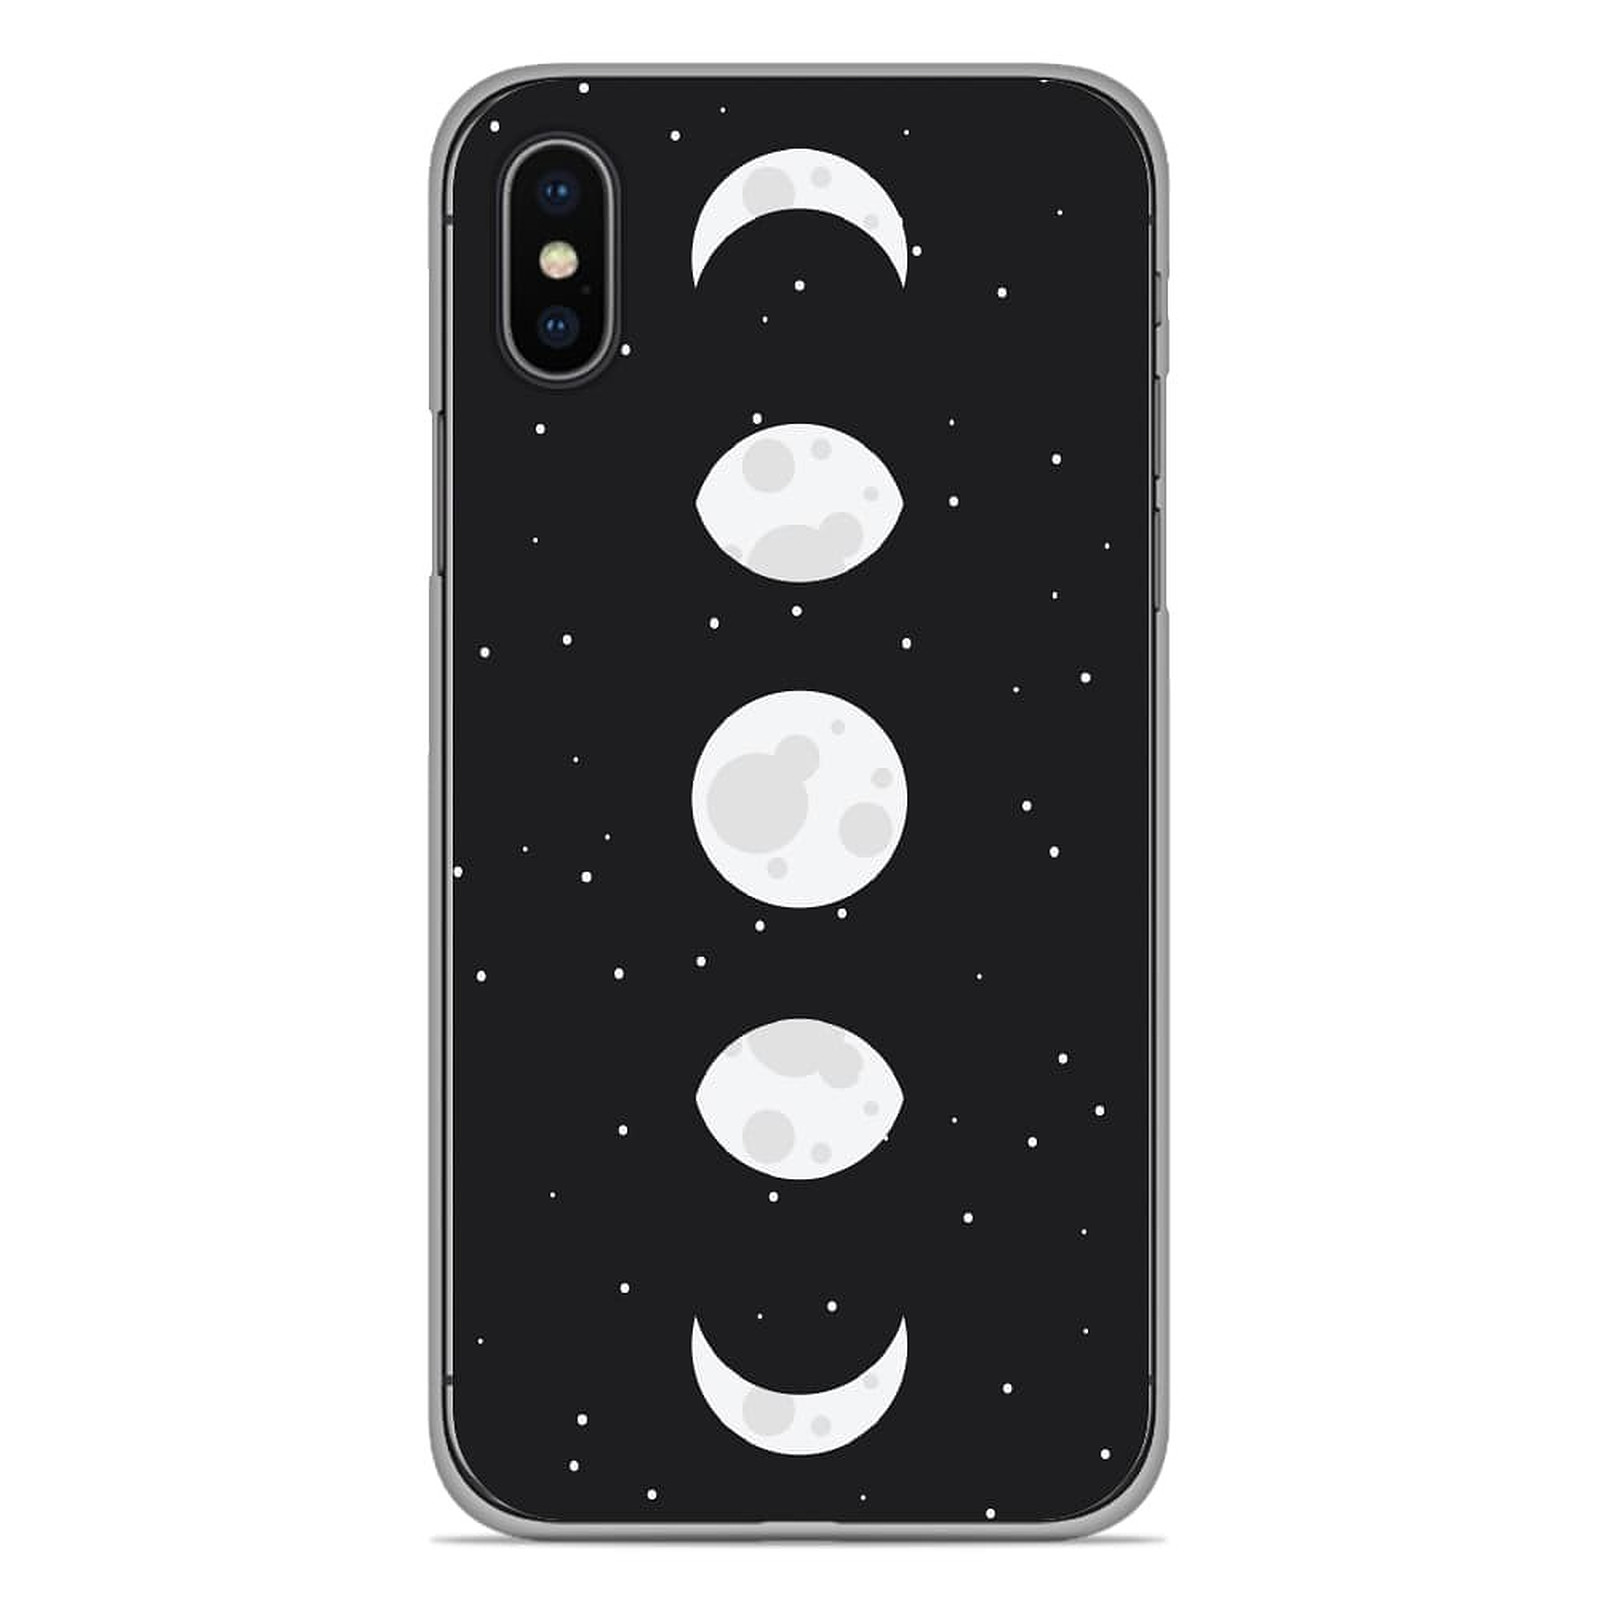 1001 Coques Coque silicone gel Apple iPhone XS Max motif Phase de Lune - Coque telephone 1001Coques